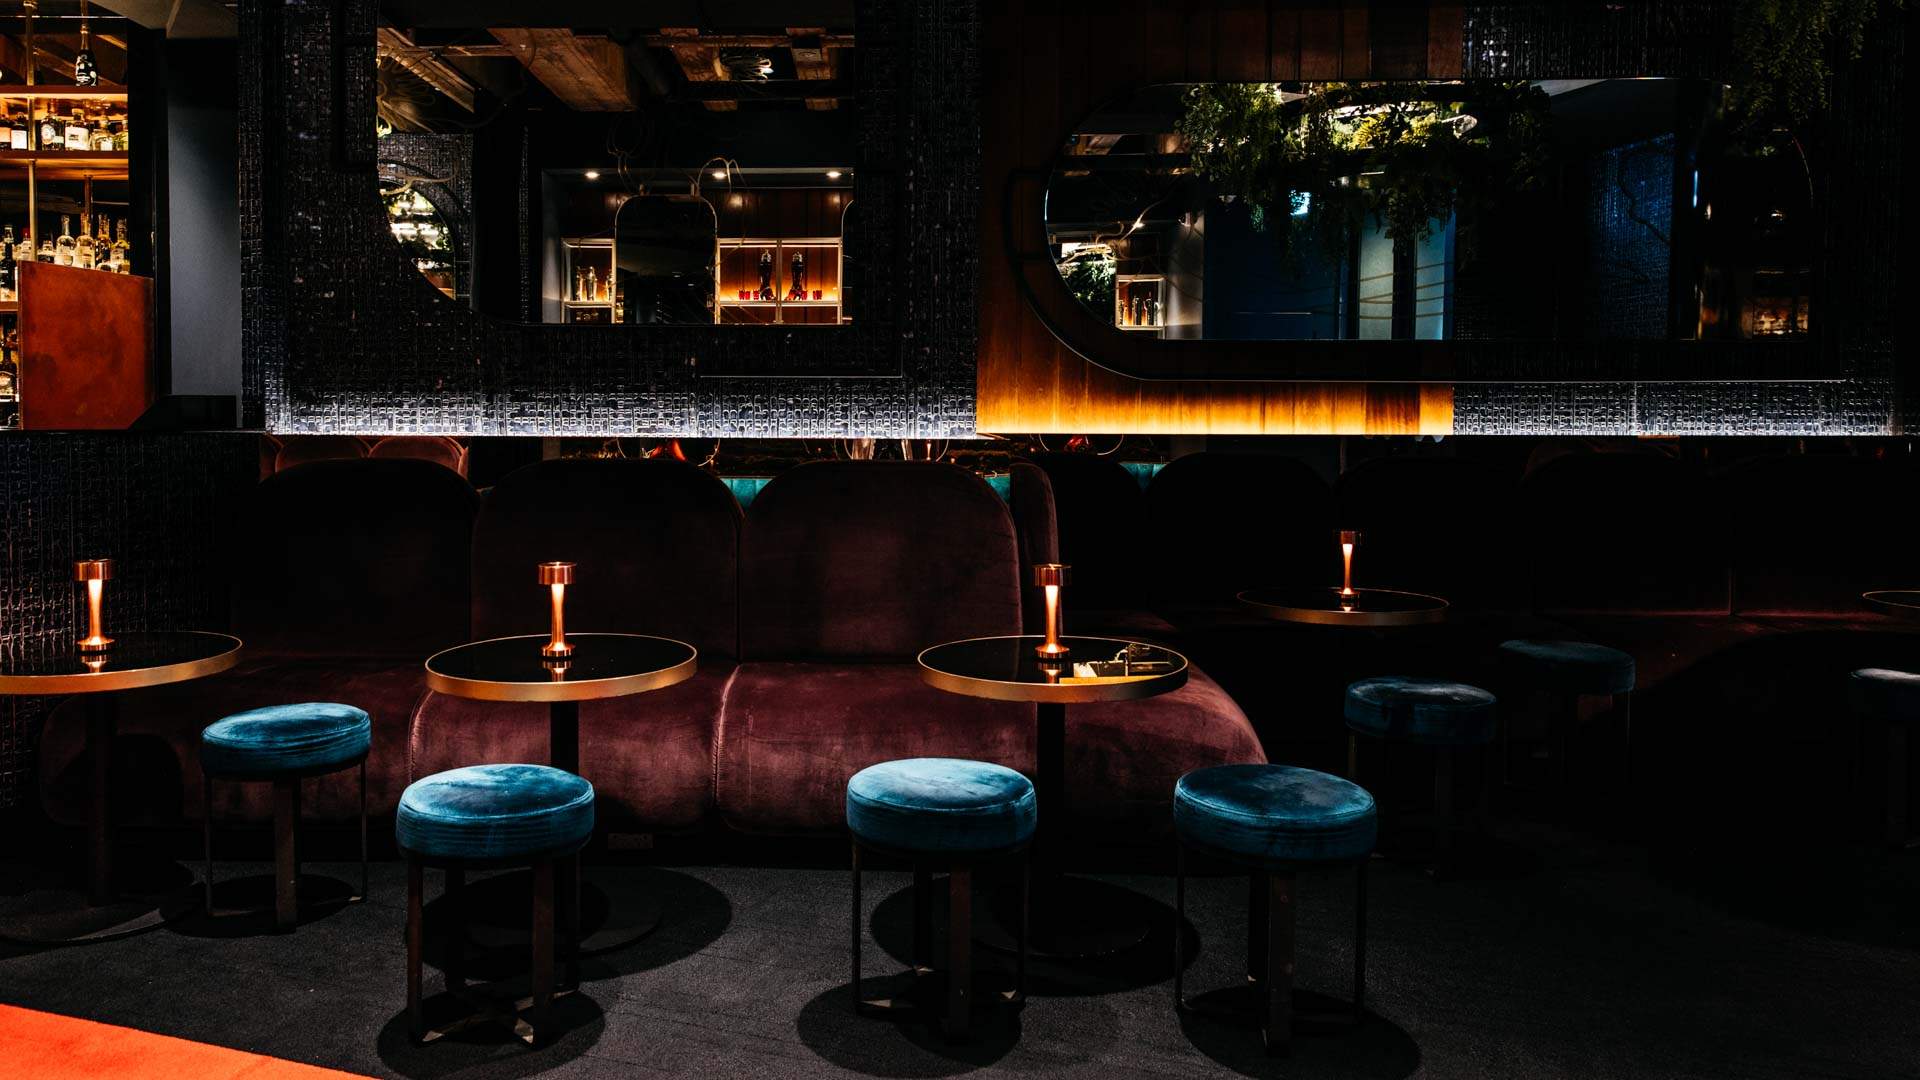 Kiss Kiss Bang Bang Is the New CBD Speakeasy from the Team Behind Mjolner and Eau de Vie